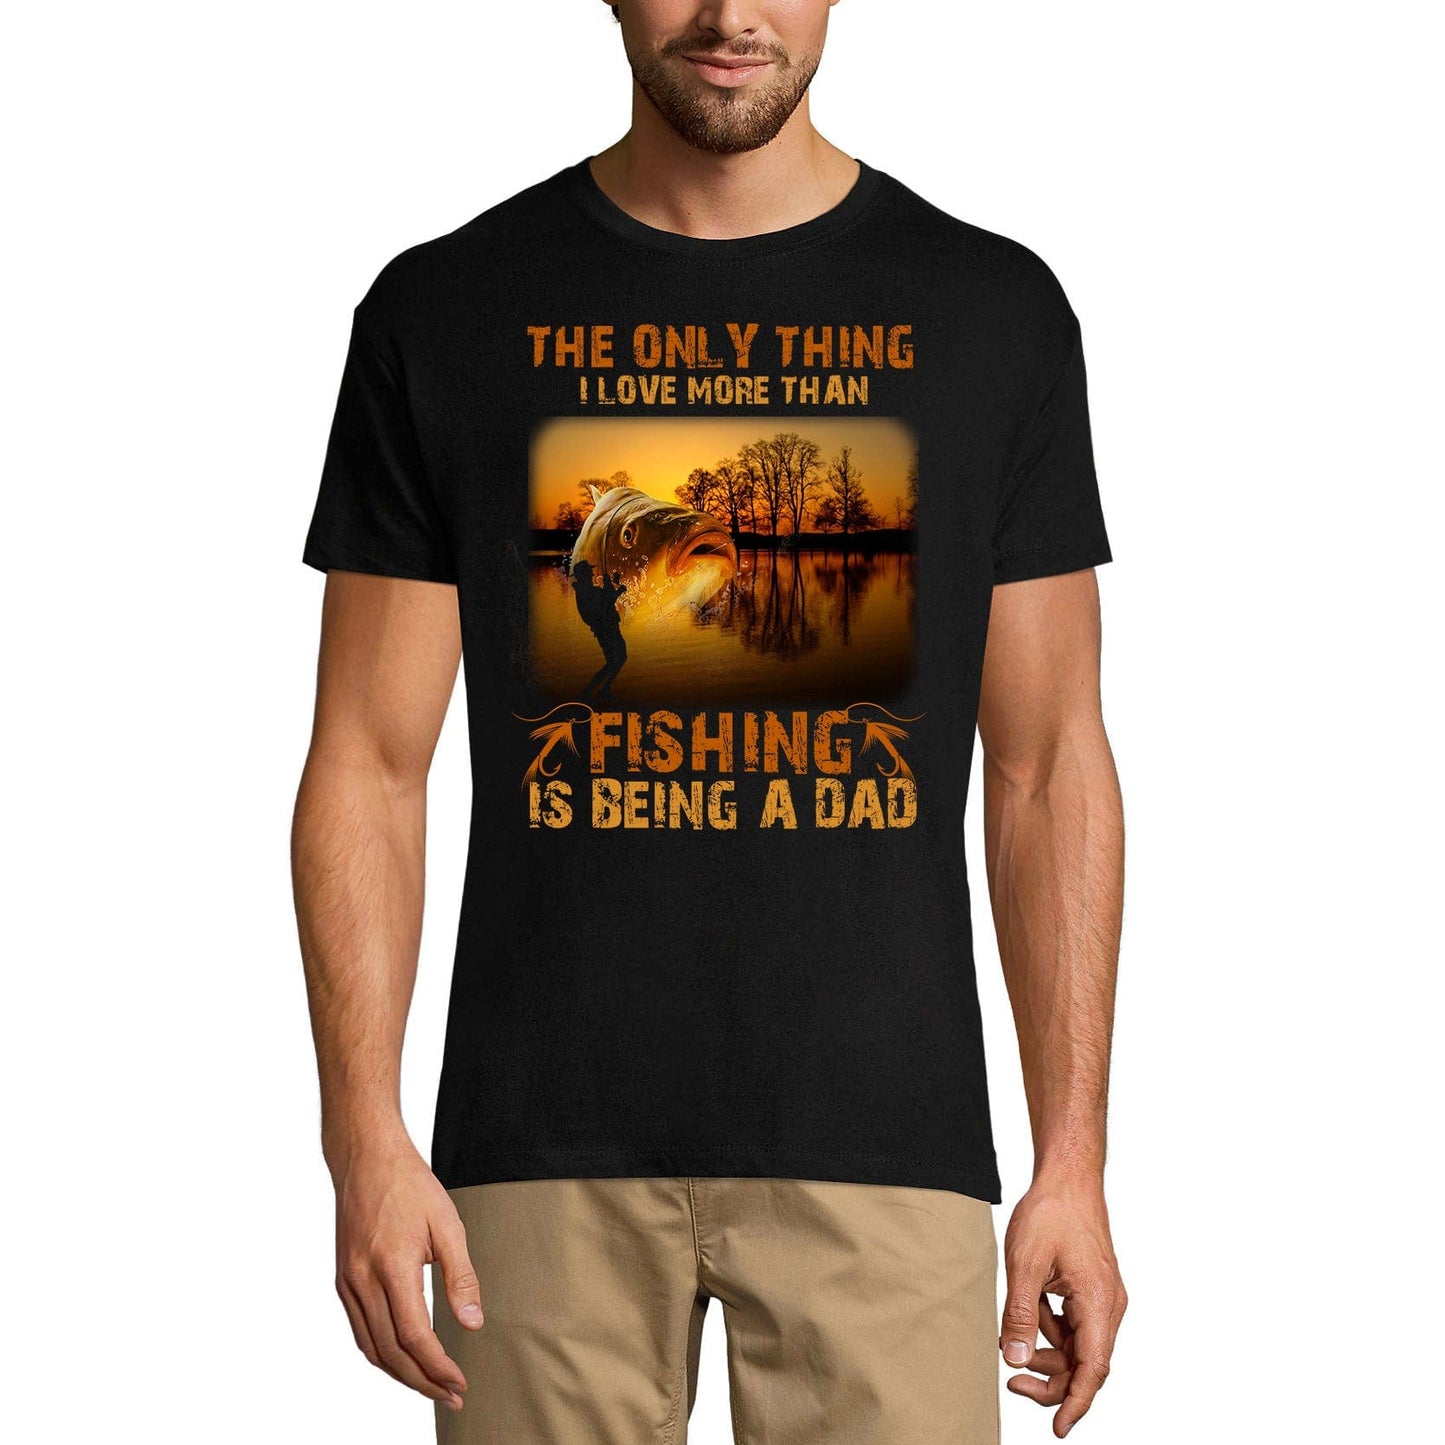 ULTRABASIC Men's T-Shirt Only Thing I Love More than Fishing is being a Dad - Fisherman Father Tee Shirt